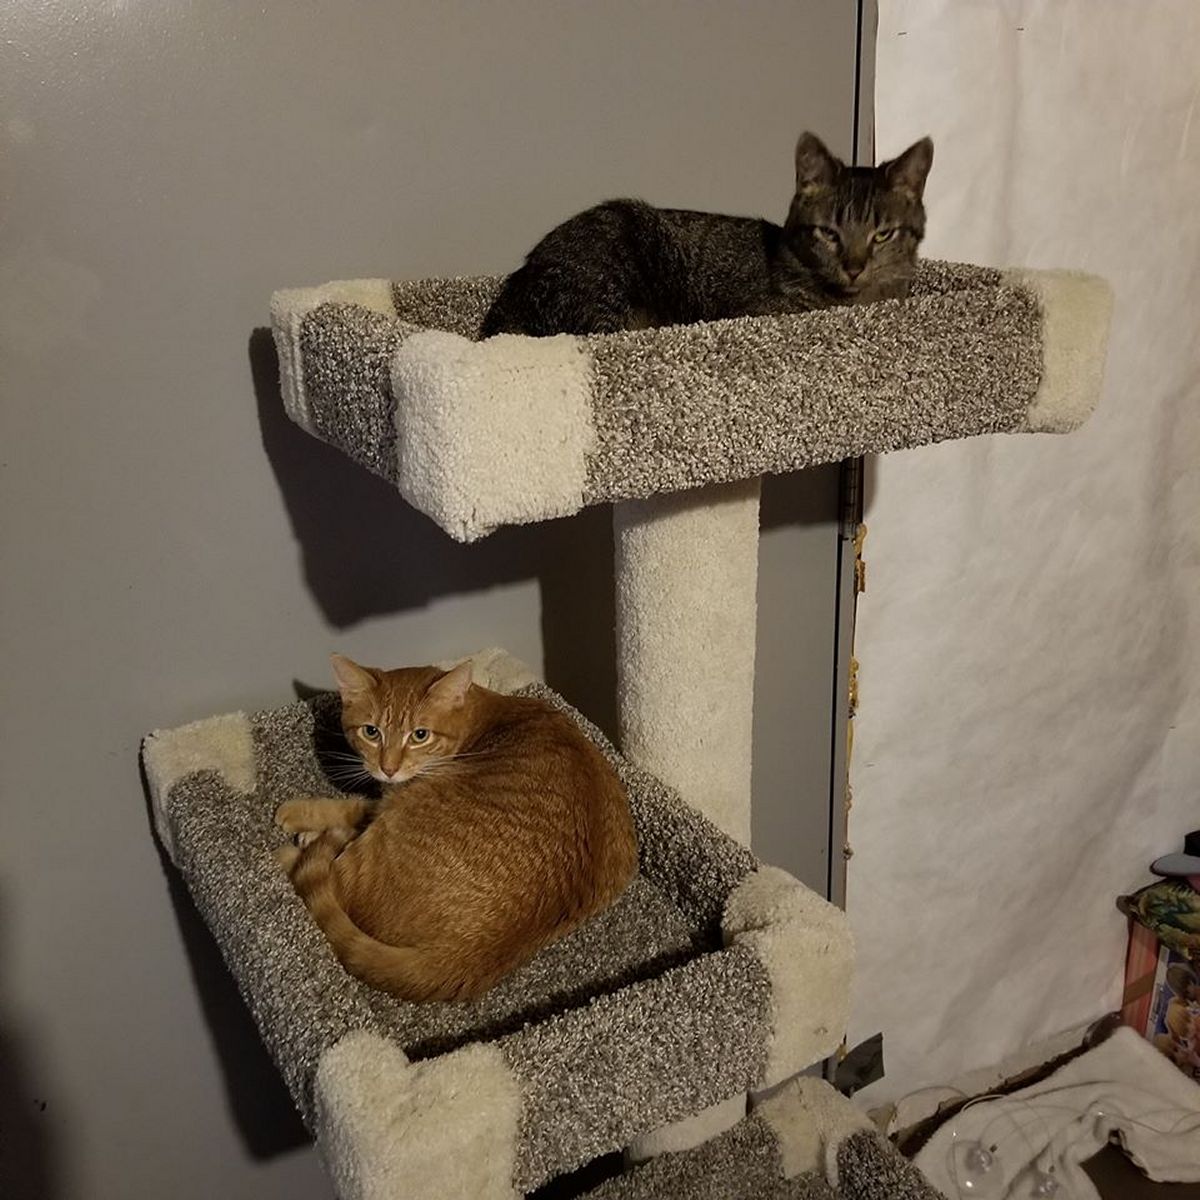 Patty and Peaches like the cat tree too